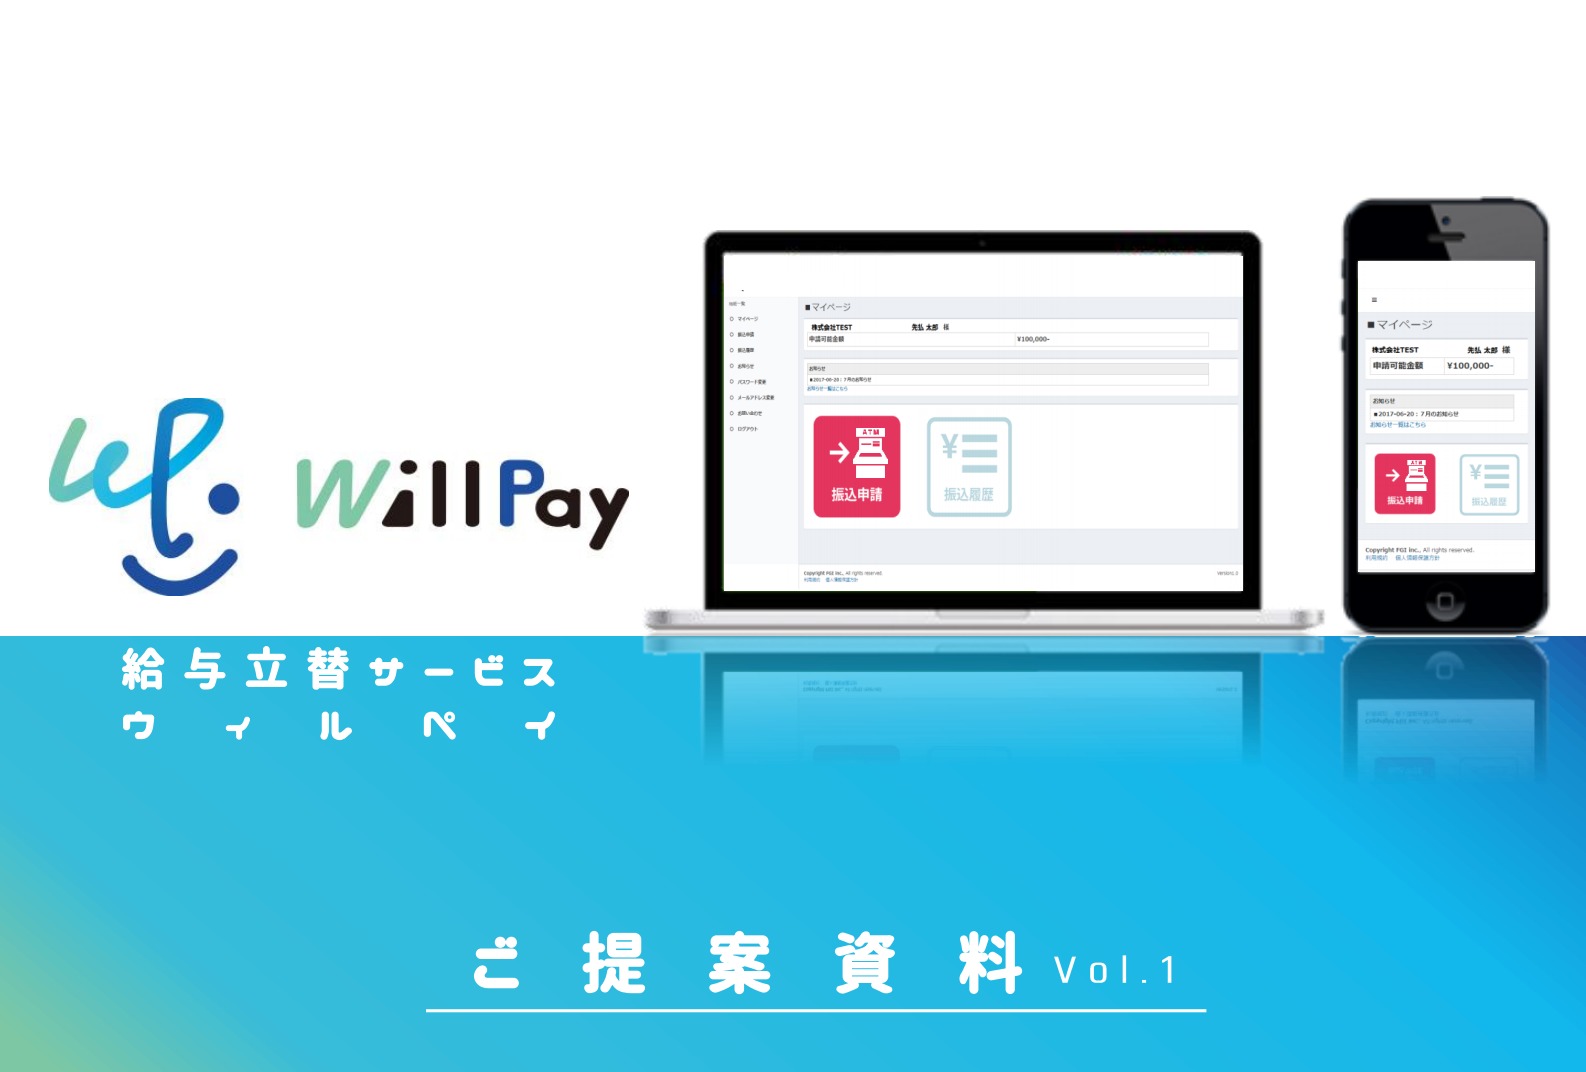 will_pay